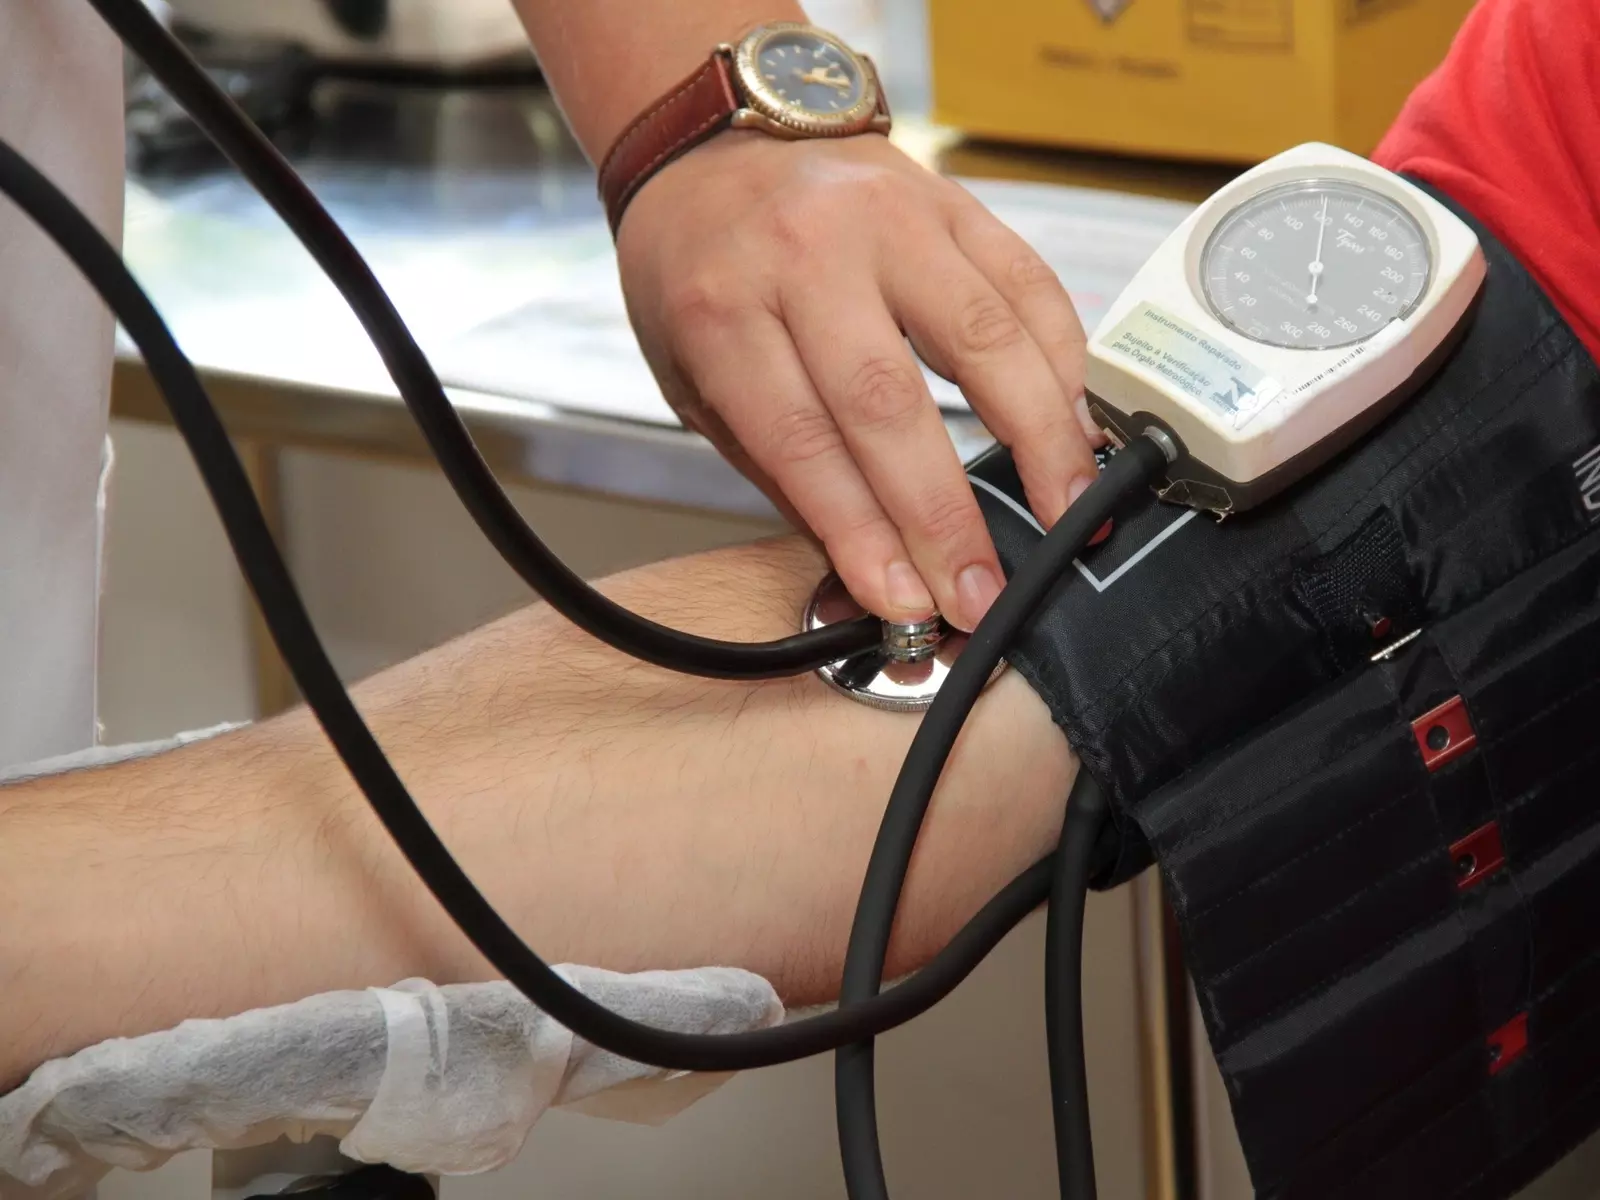 Silent damages: Why you should keep track of your blood pressure